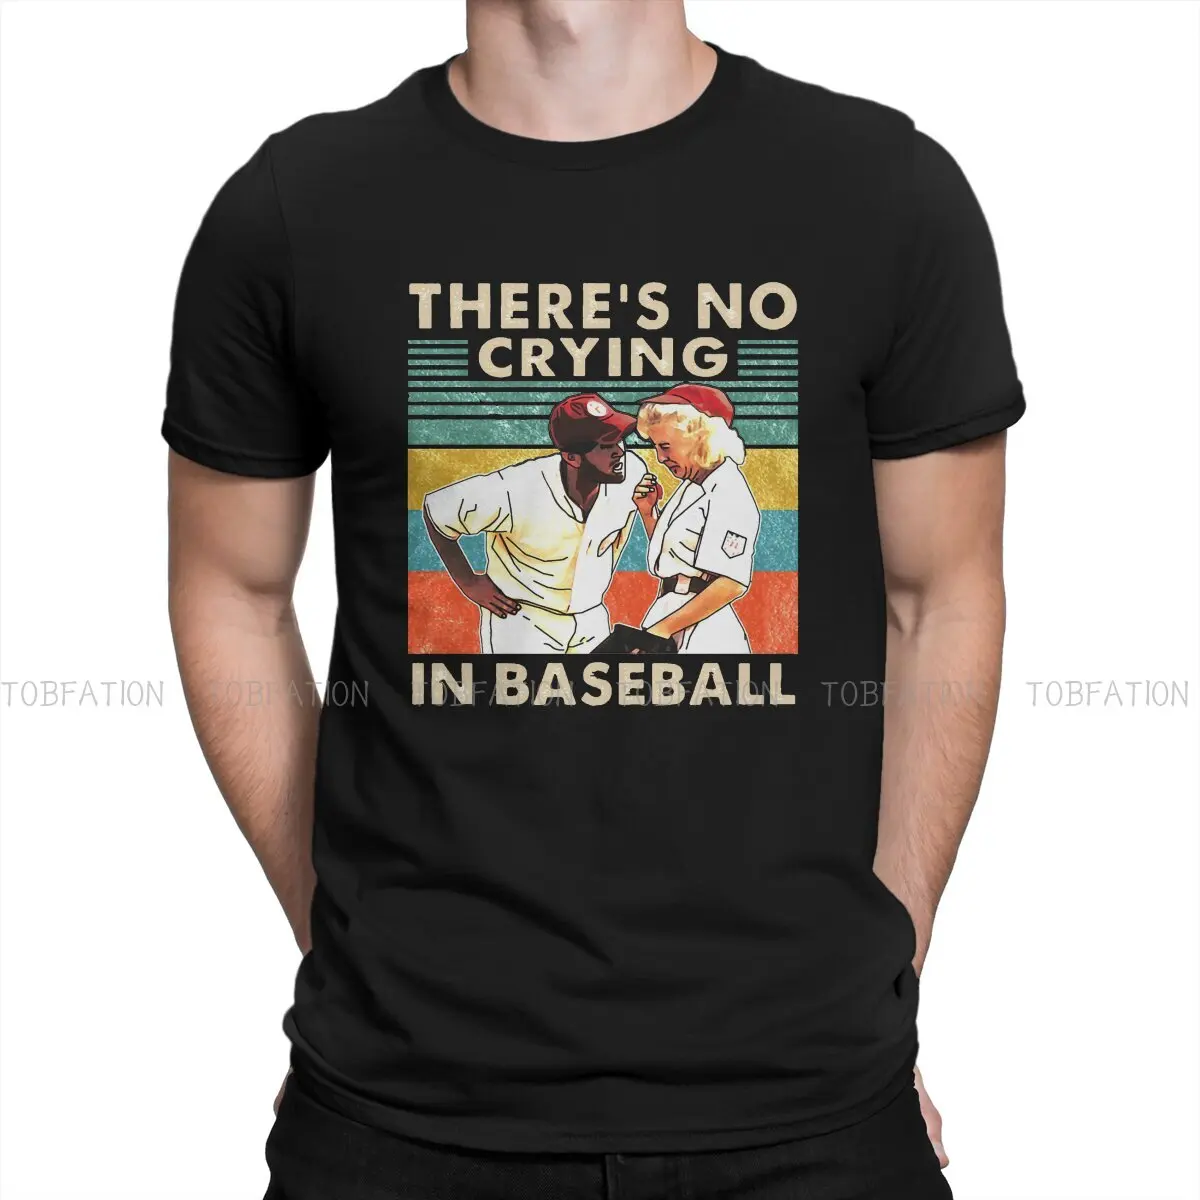 

There's No Crying In Baseball Special TShirt A League Of Their Own Tom Hanks Comfortable Hip Hop Gift Idea T Shirt Stuff Sale